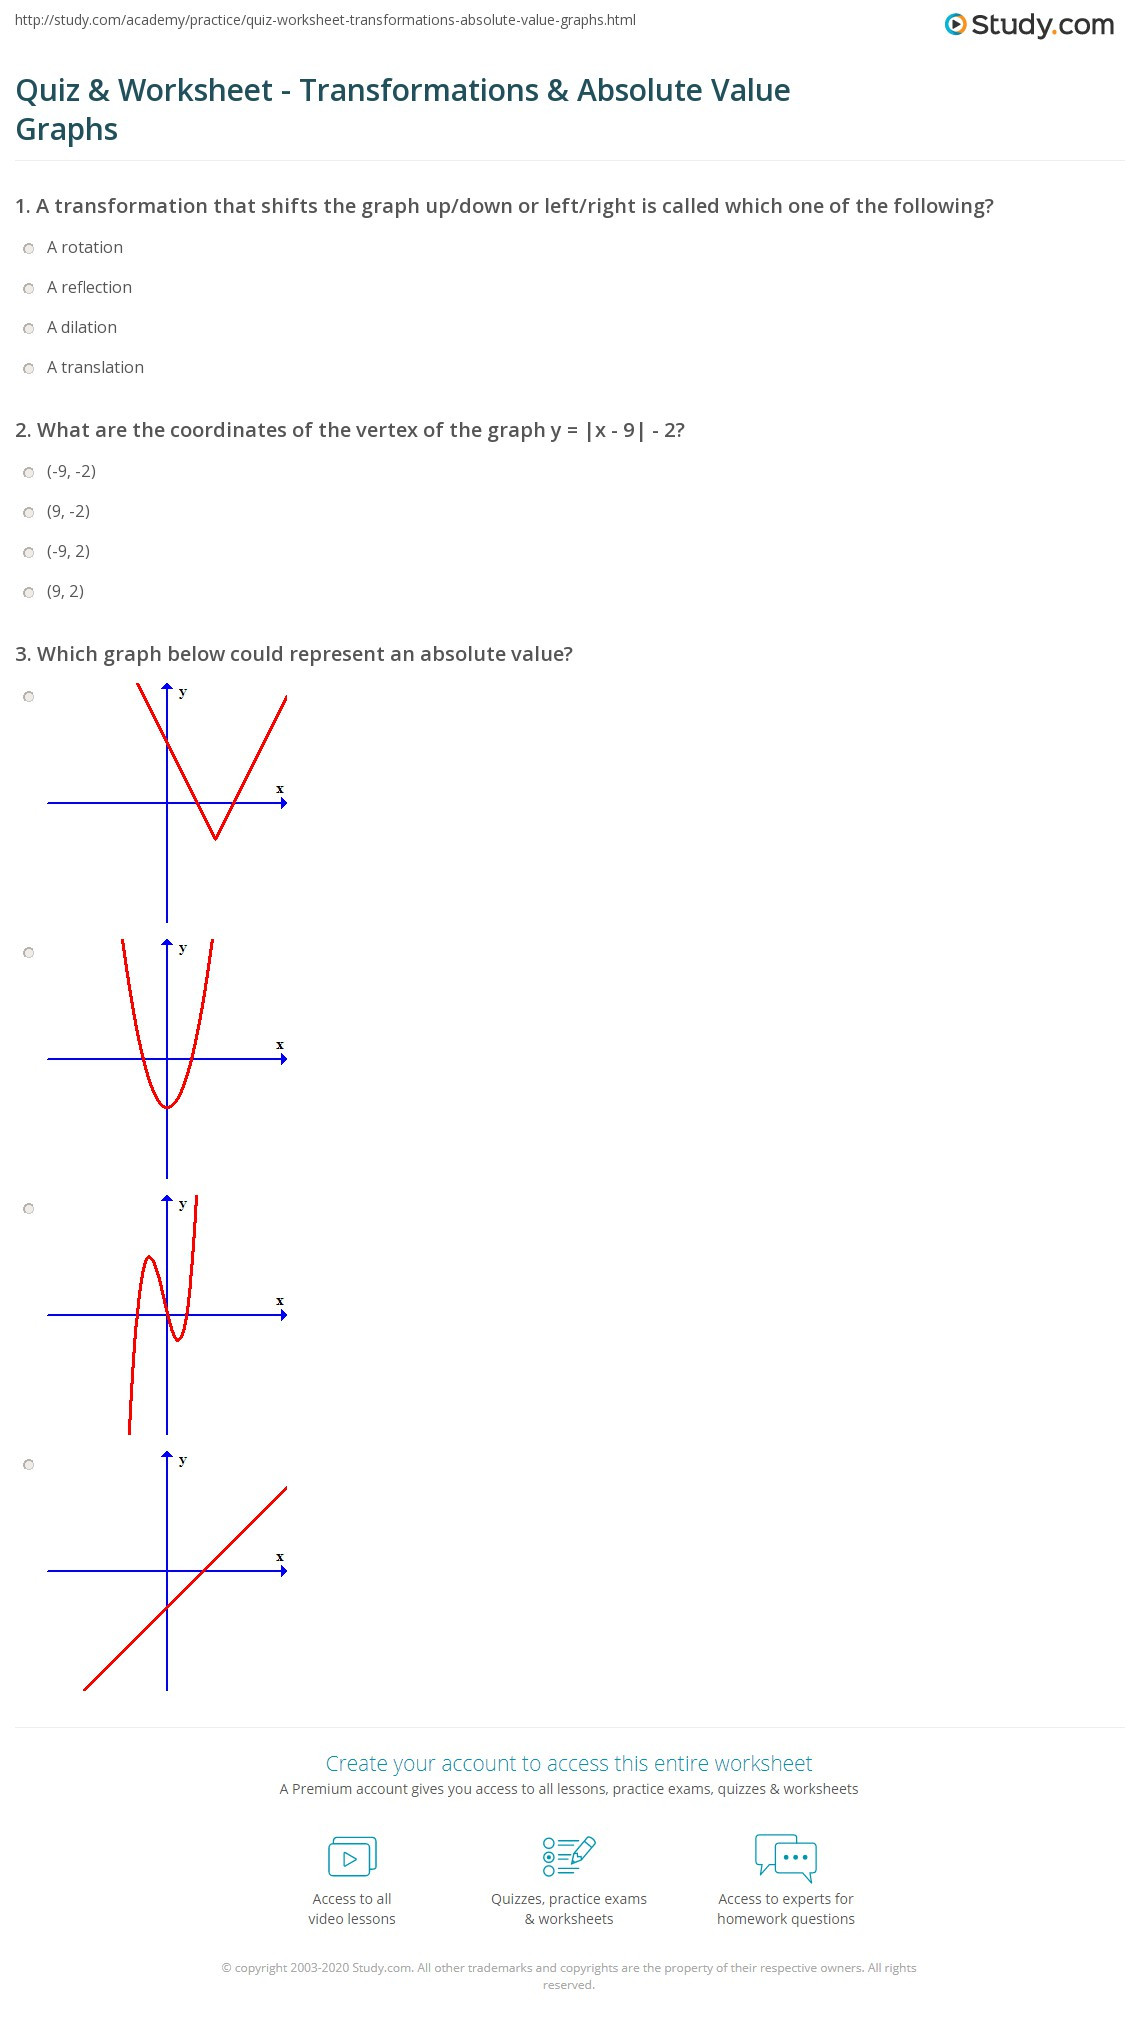 Graphing Absolute Value Functions Worksheet Quiz &amp; Worksheet Transformations &amp; Absolute Value Graphs